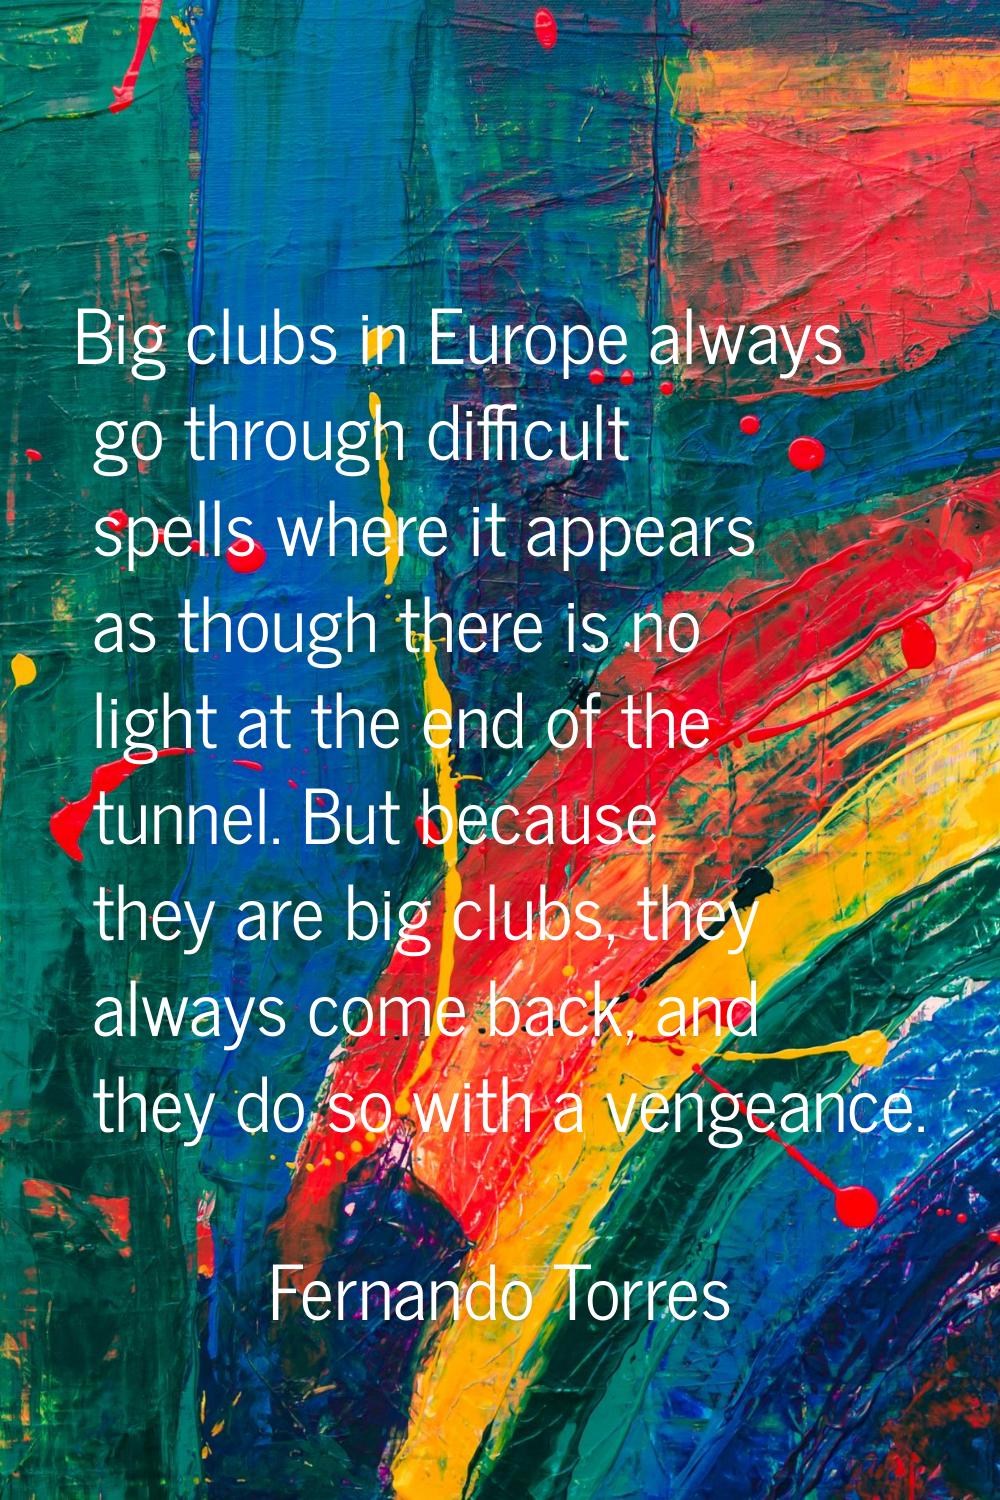 Big clubs in Europe always go through difficult spells where it appears as though there is no light